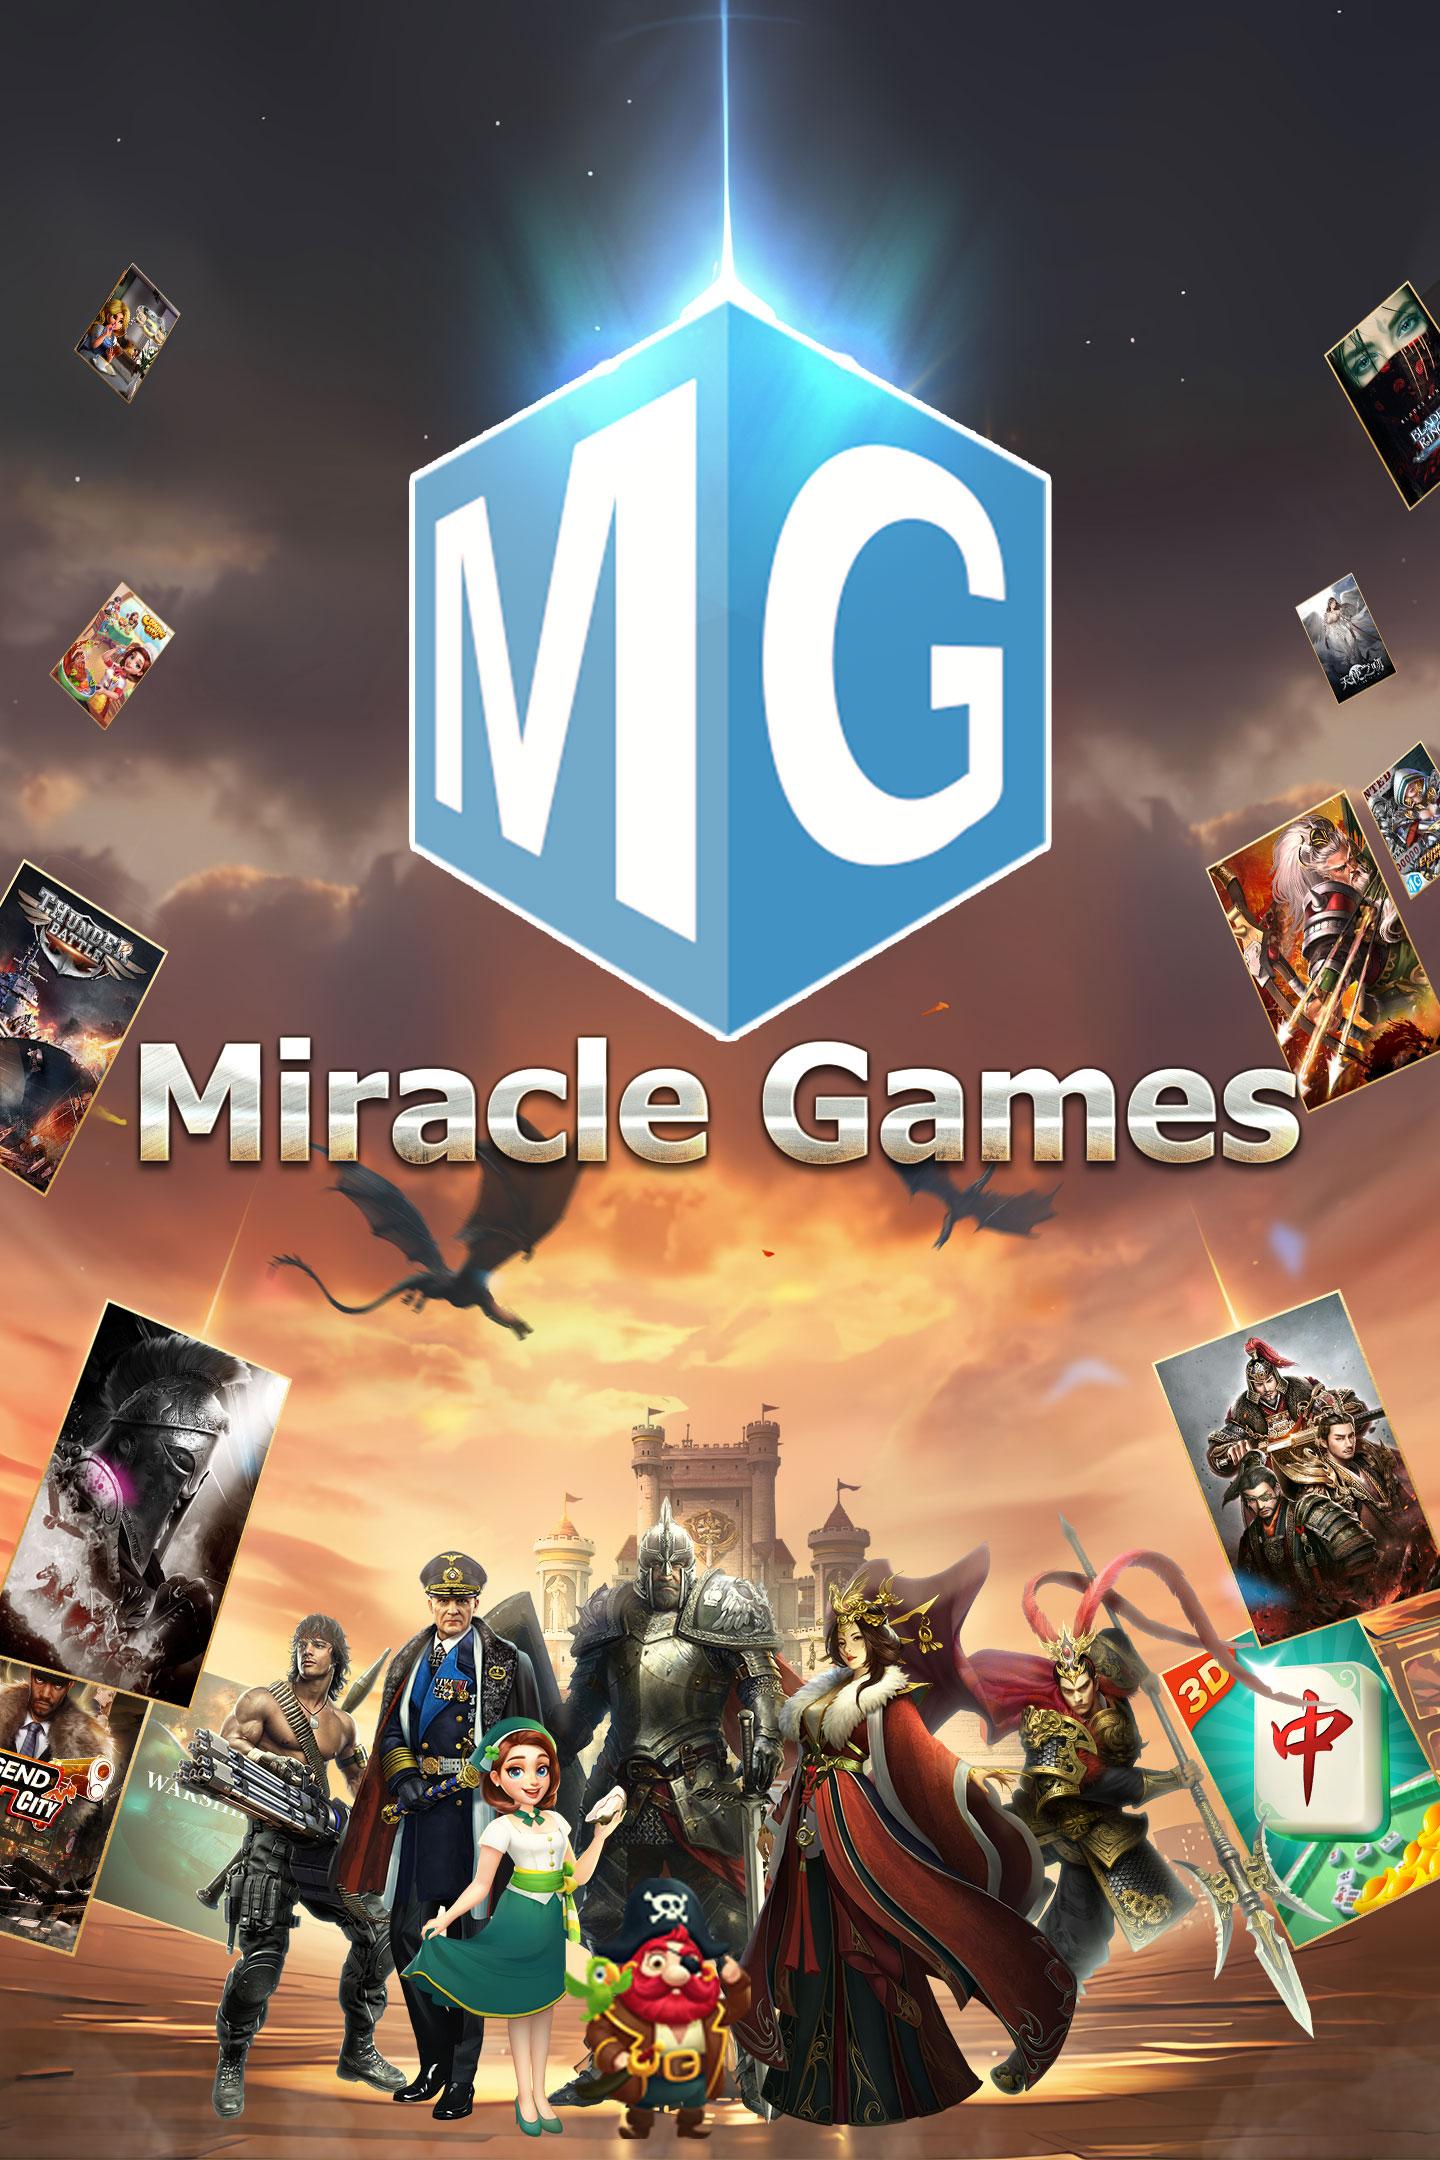 MIRACLE GAMES Store: Recommended The Best Game